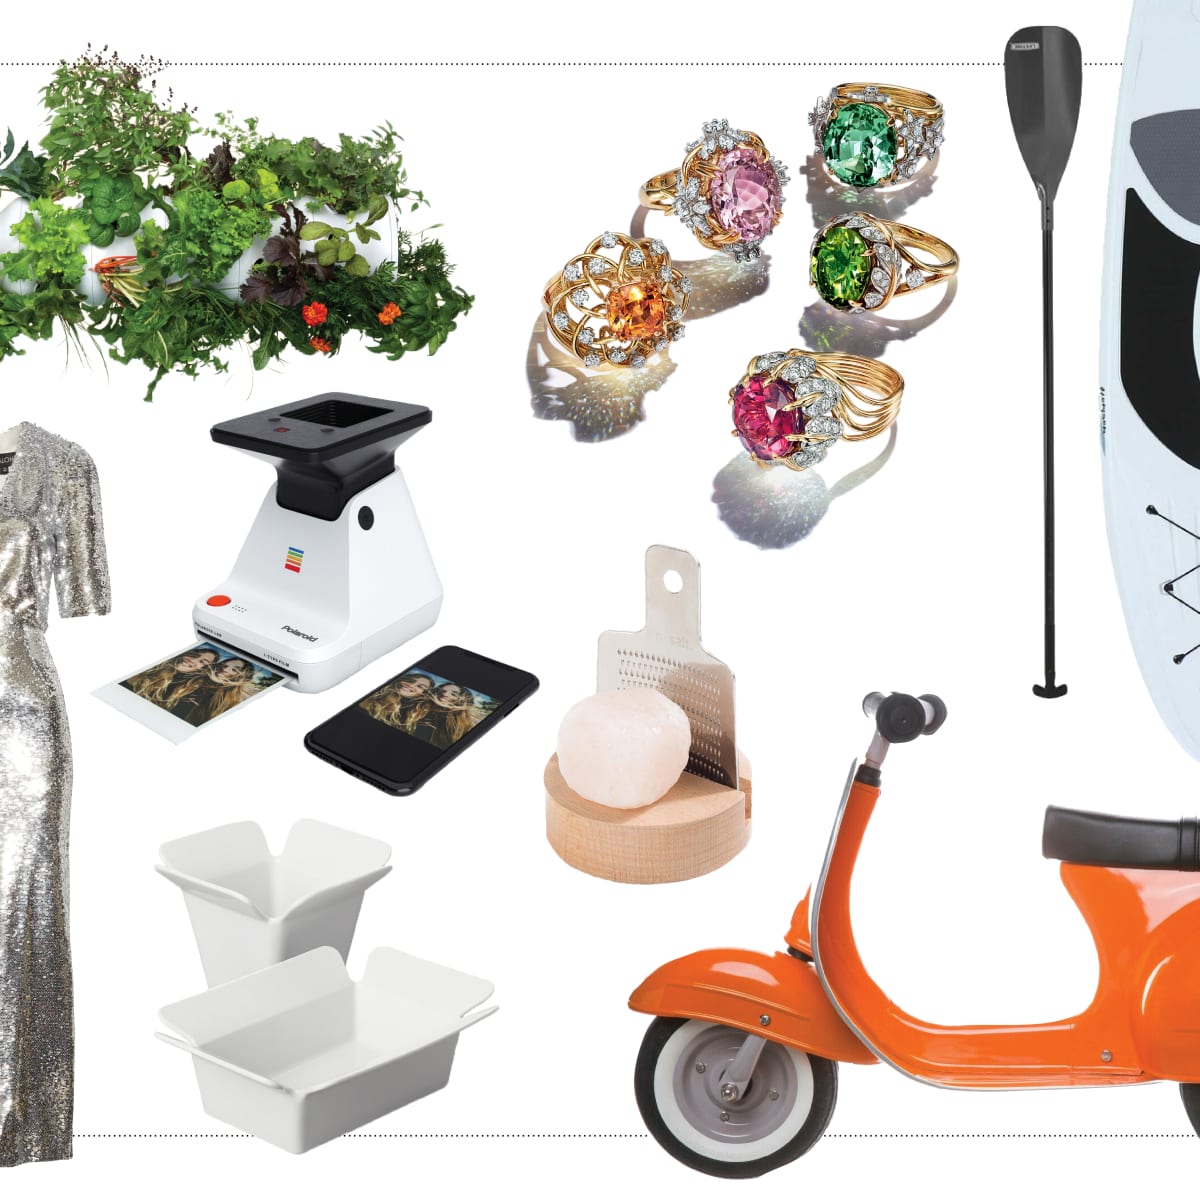 2019 Holiday Gift Guide:  Under $25 for Him + Her - Life By Lee